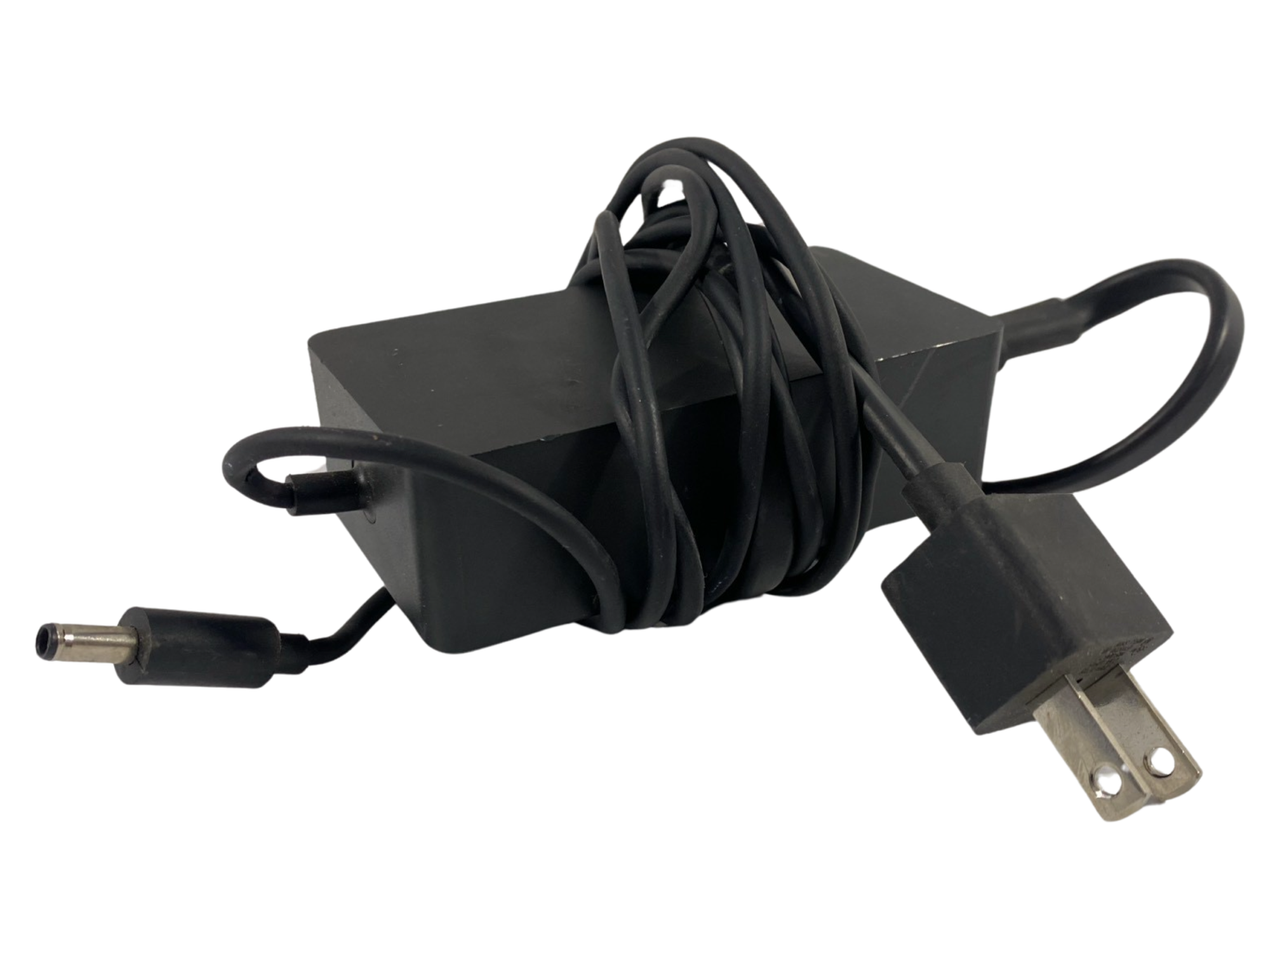 Microsoft 1627 AC Adapter for Surface Pro 3 Docking Station 12V 4.0A